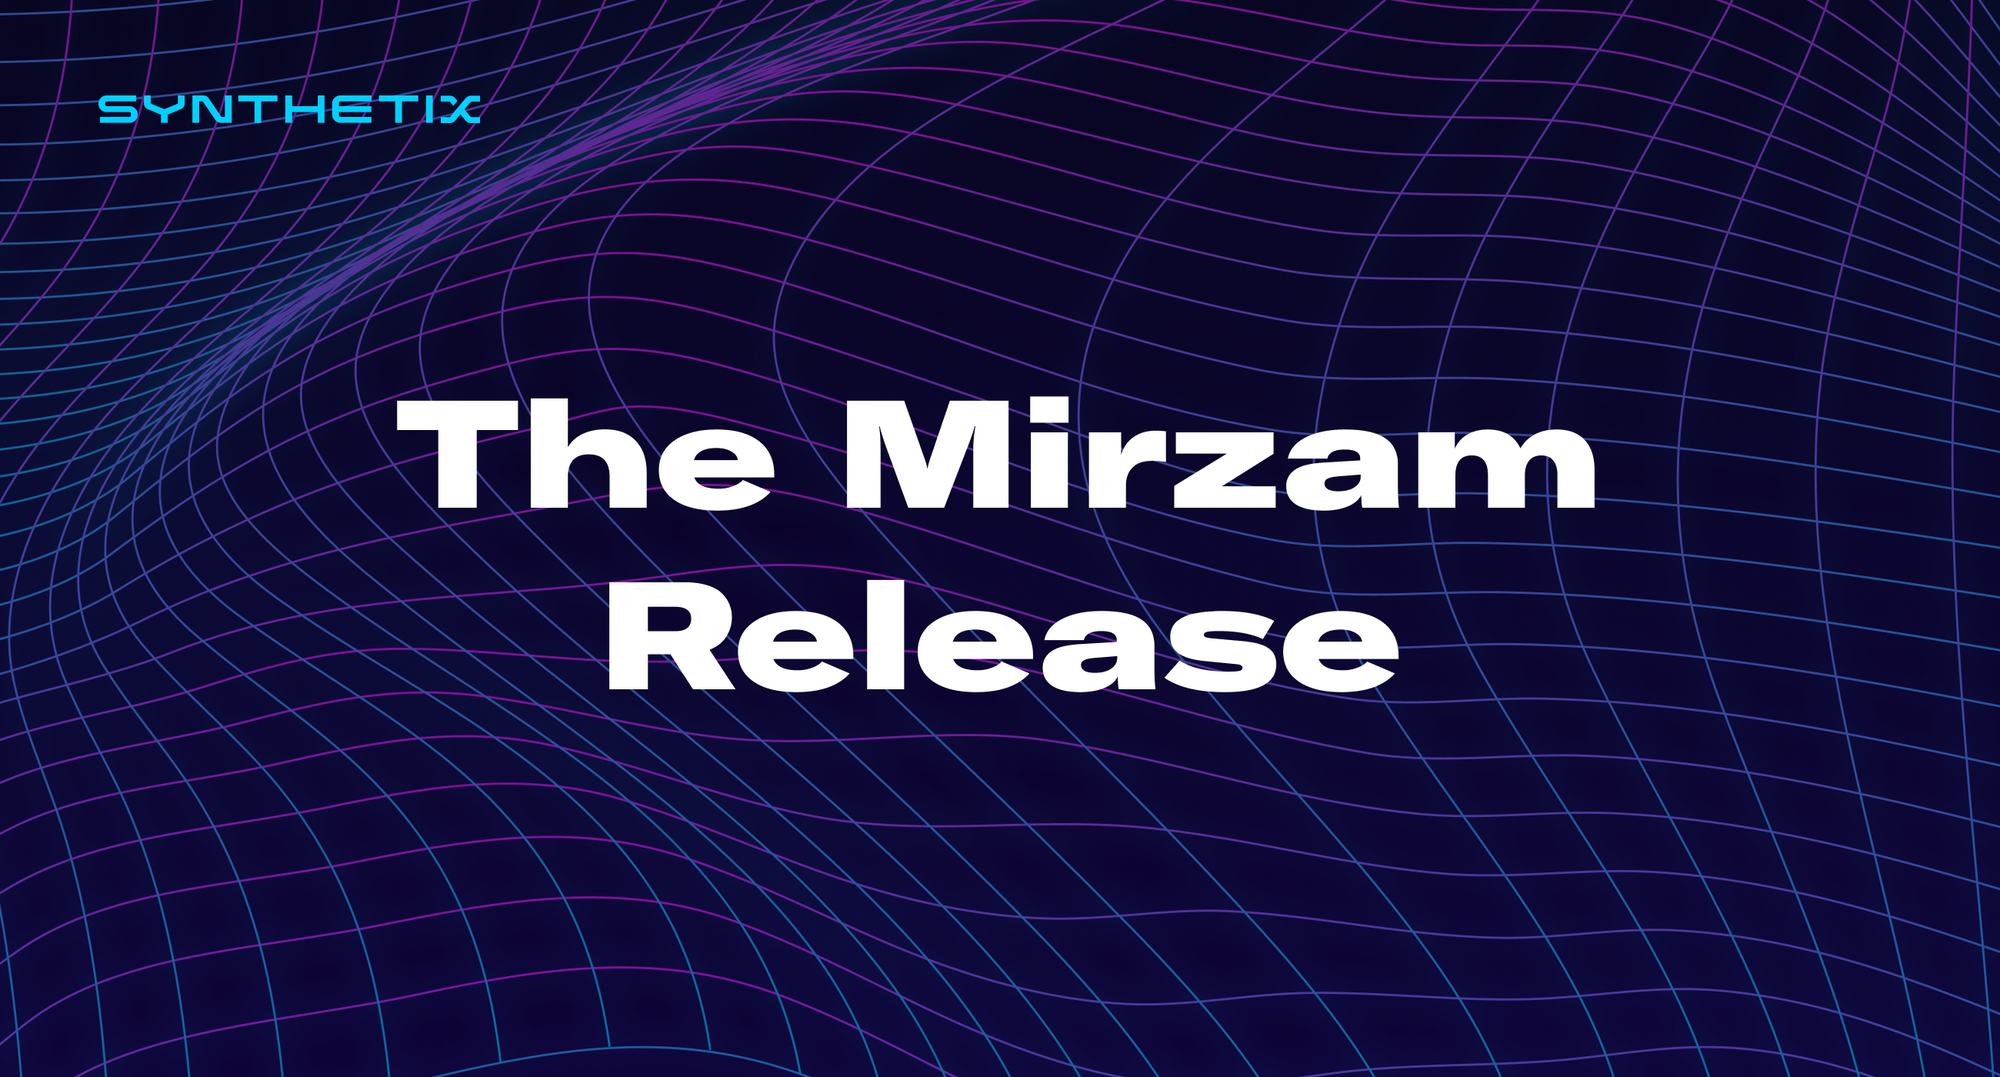 The Mirzam Release